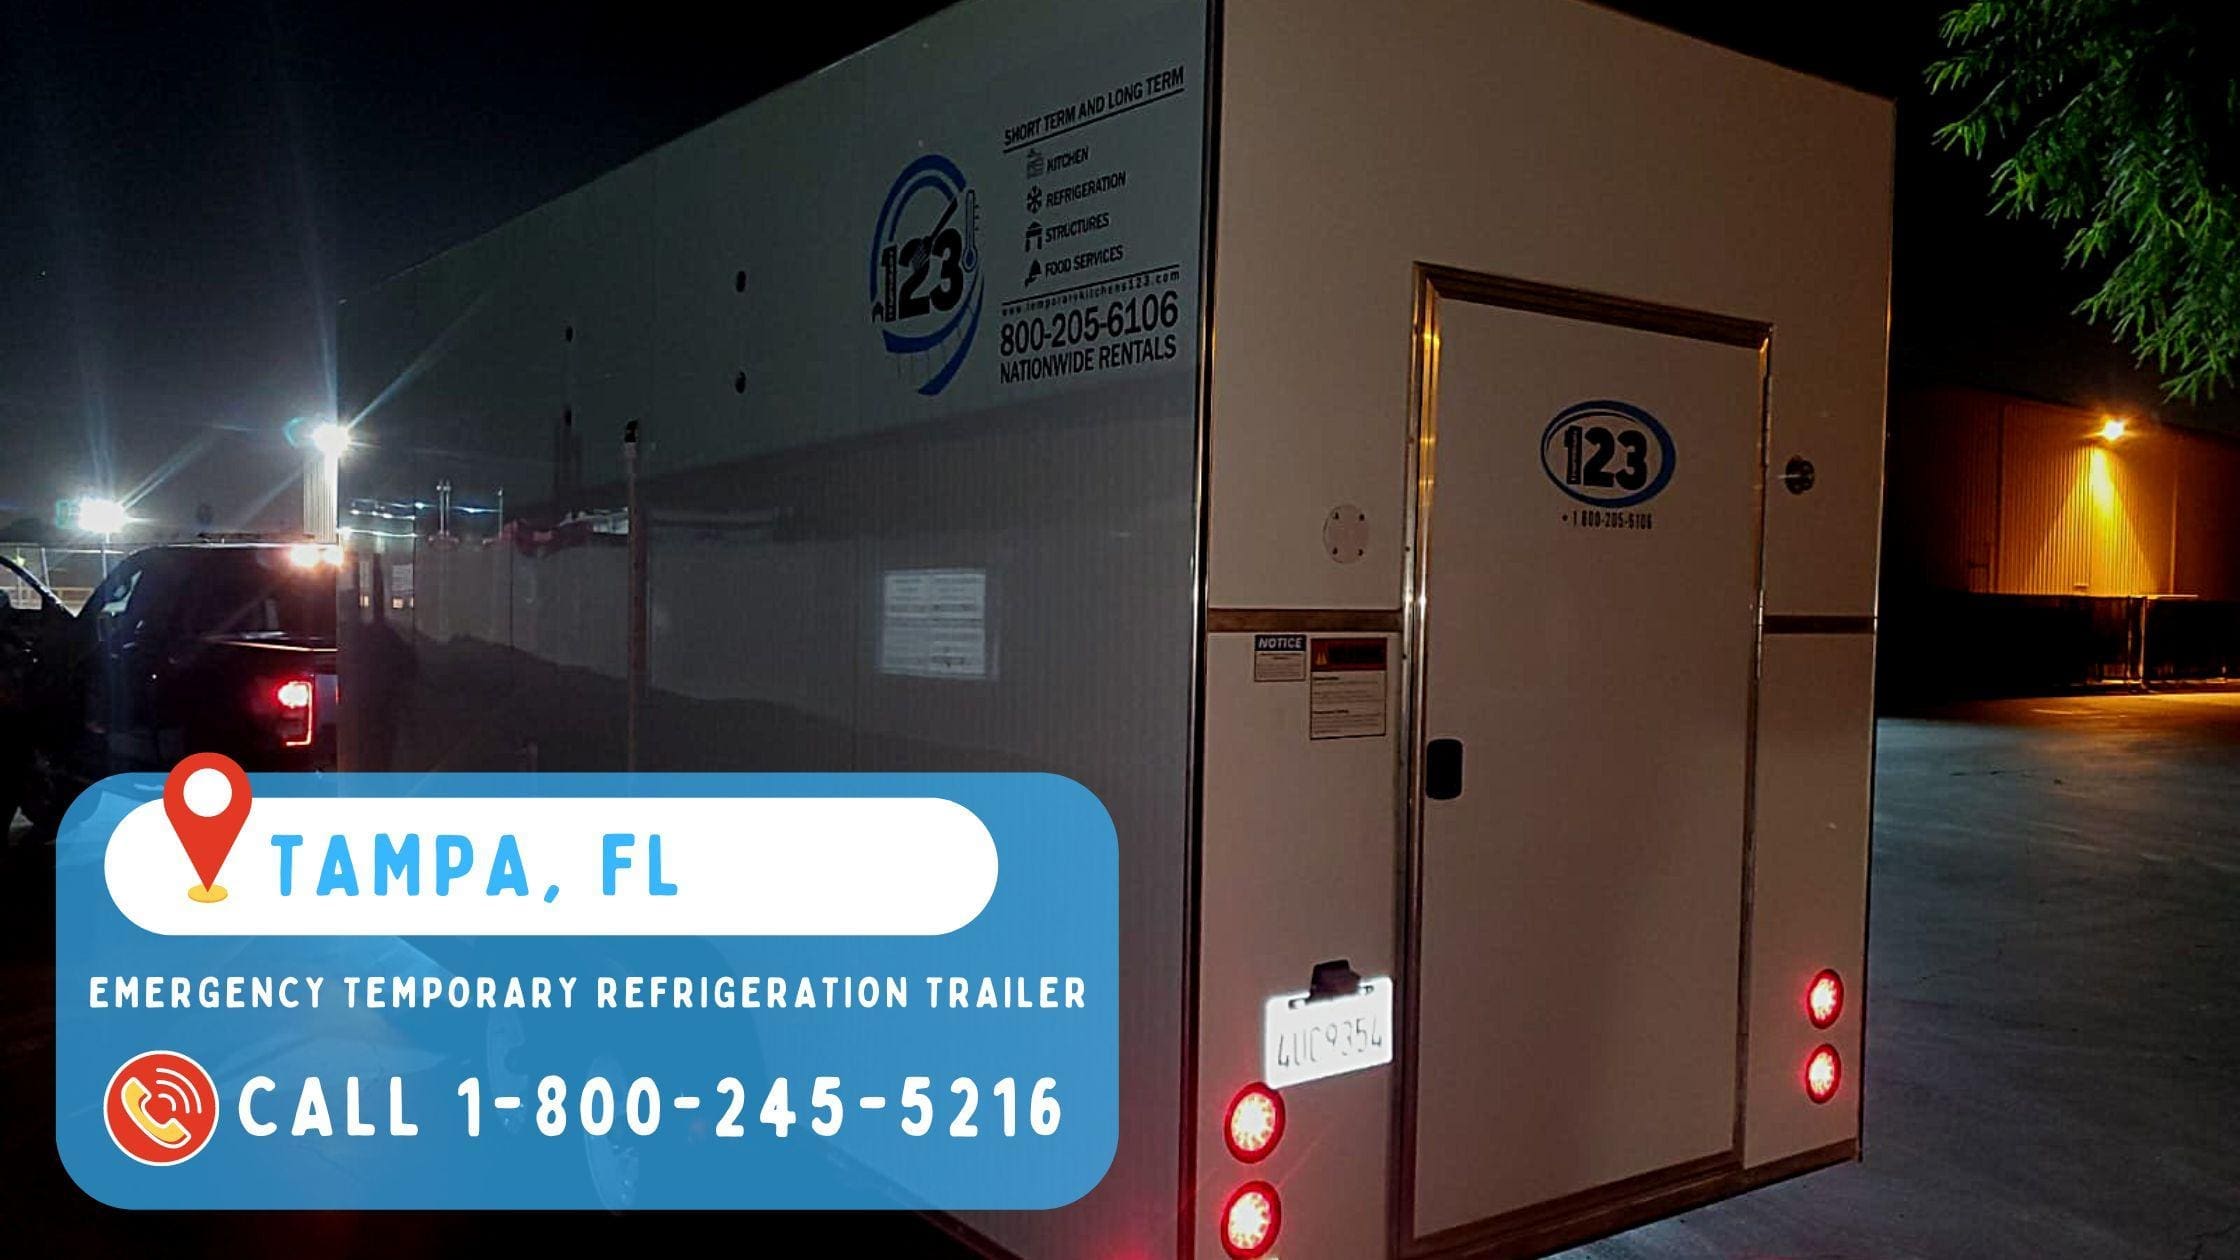 Emergency Temporary refrigeration trailer in Tampa